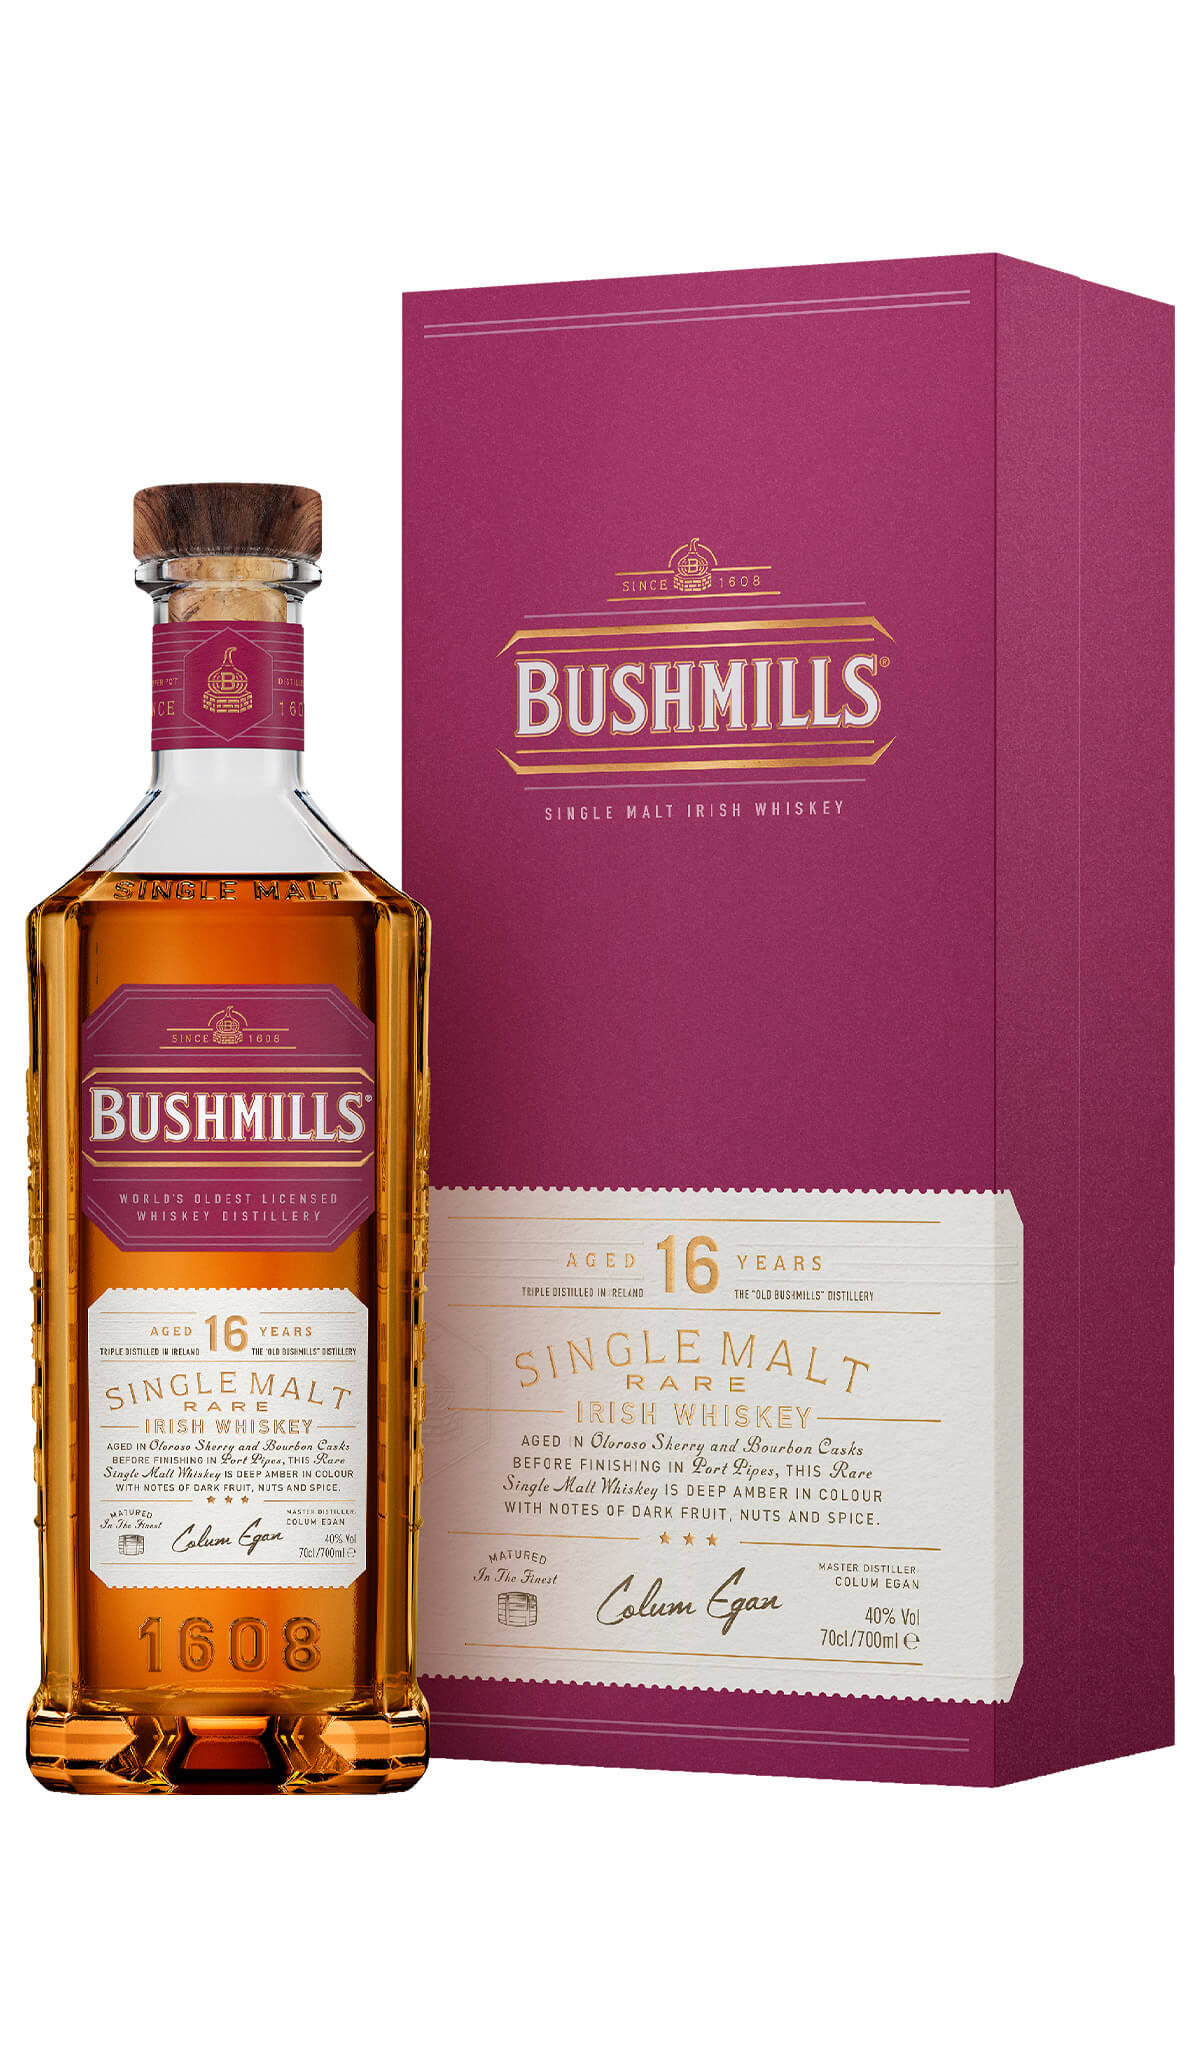 Find out more or buy Bushmills Single Malt Irish Whiskey 16 Year Old 700ml online at Wine Sellers Direct - Australia’s independent liquor specialists.